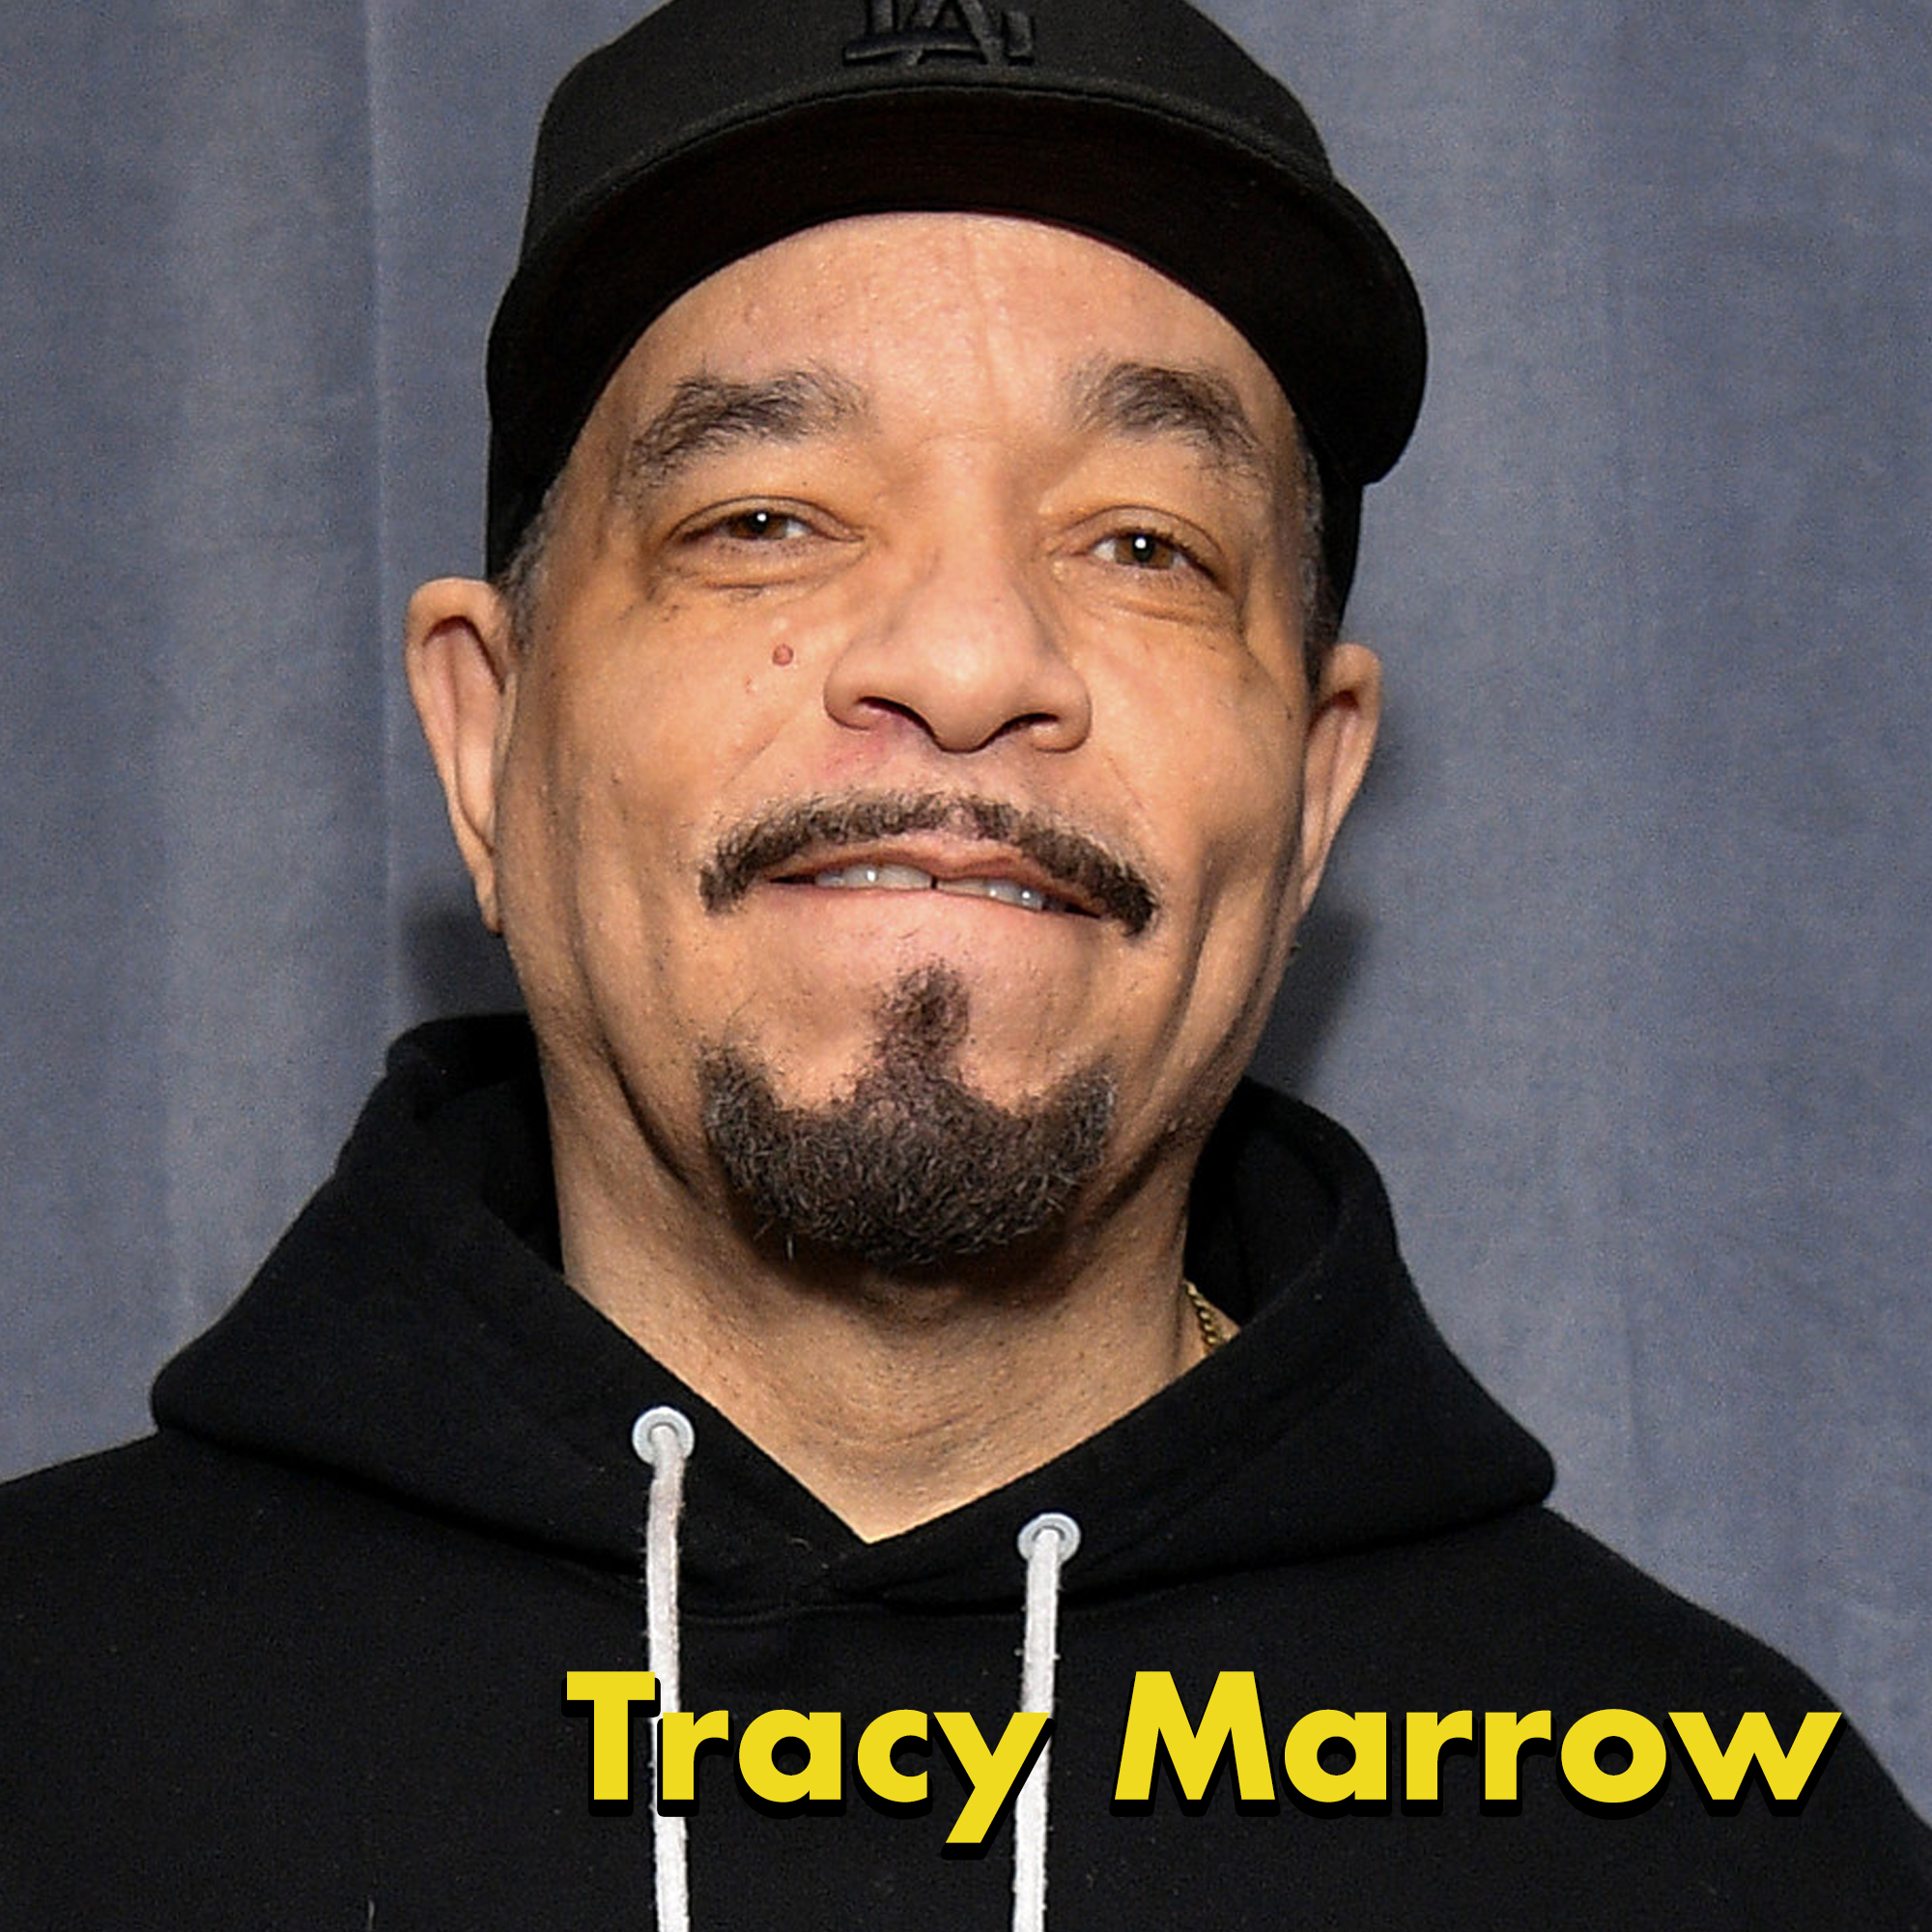 Celebrities' Real Names - ice t